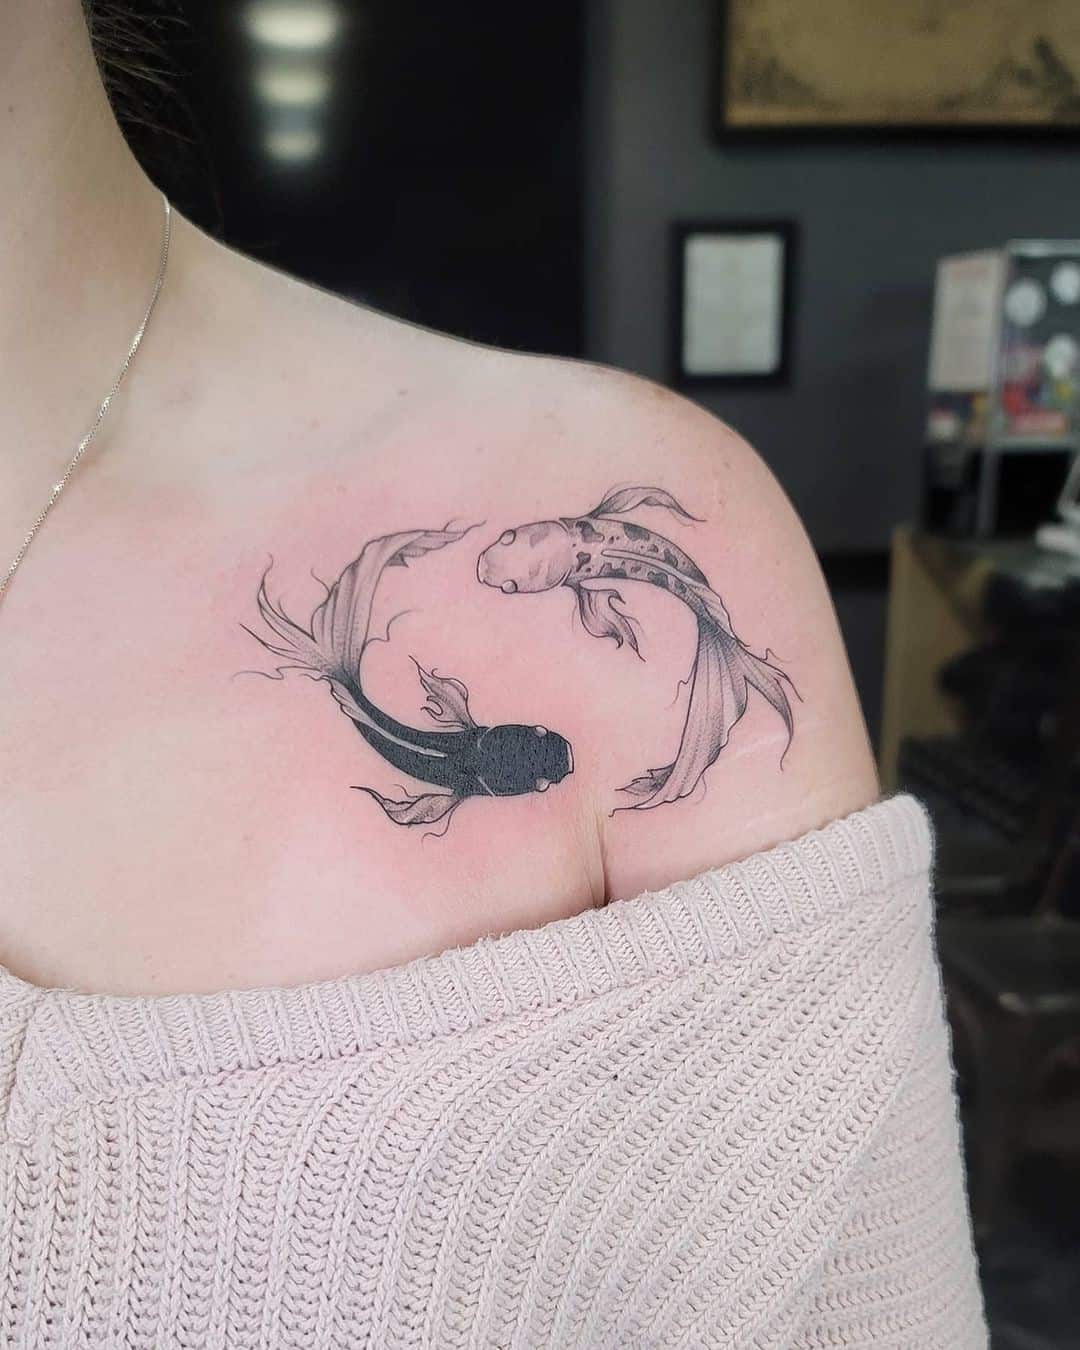 Koi Fish done by Mia at Lines of Addiction in Deception Bay, Queensland : r/ tattoos